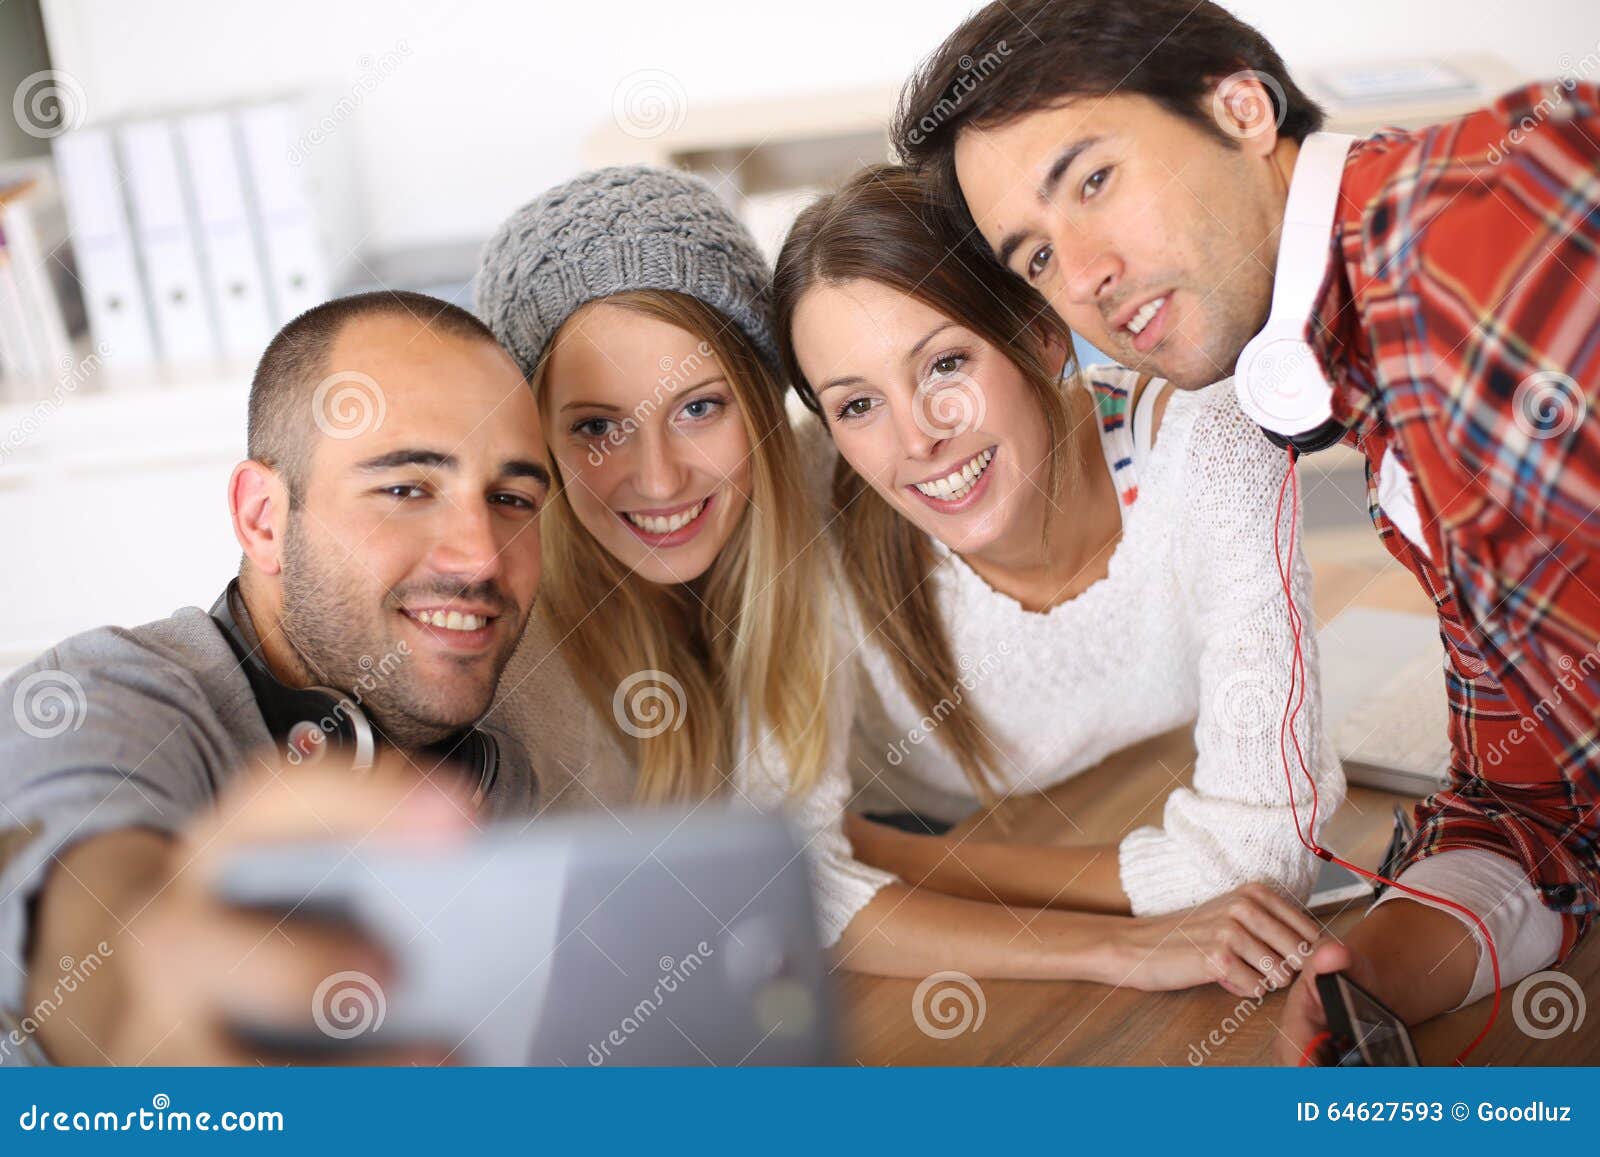 Group Of Friends Having Fun Taking Selfie Stock Image Image Of Casual 